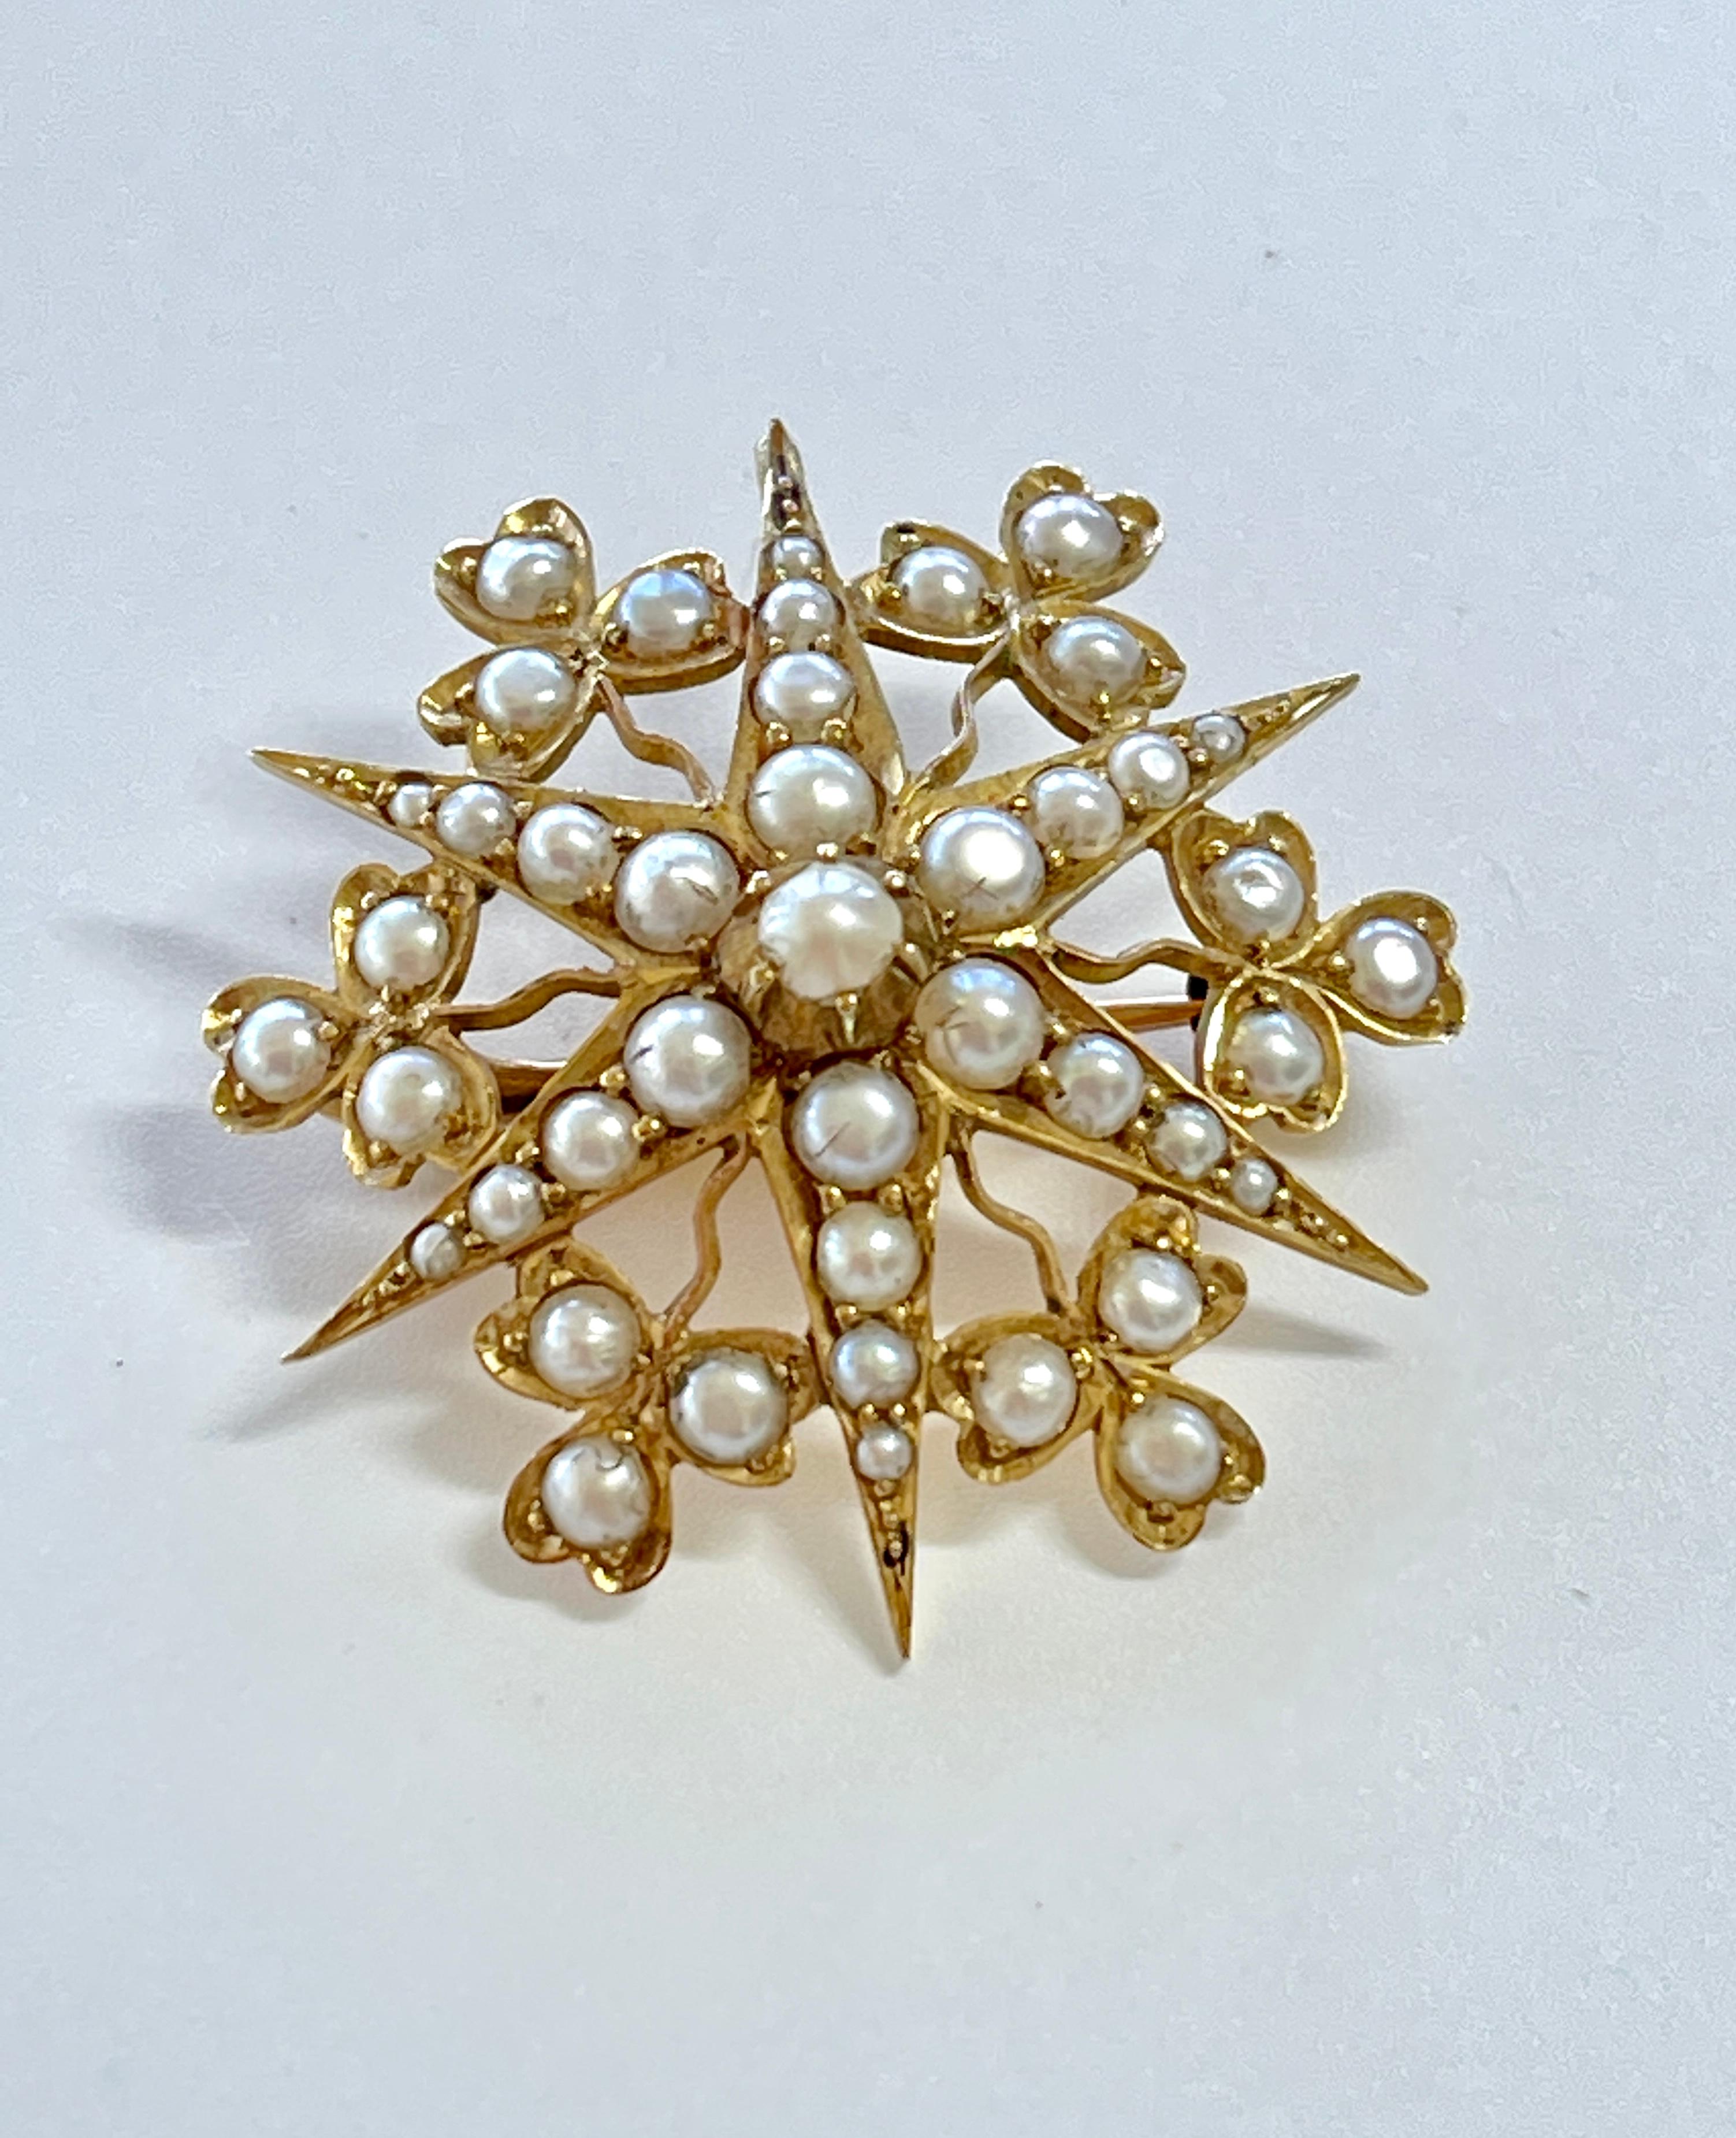 This gorgeous brooch will grab your heart!
It is a wonderful Edwardian piece c1905, that features very lustrous, split pearls, set in a star and hearts design.  The lustre on these pearls is really good and it makes the brooch quite eye catching. 